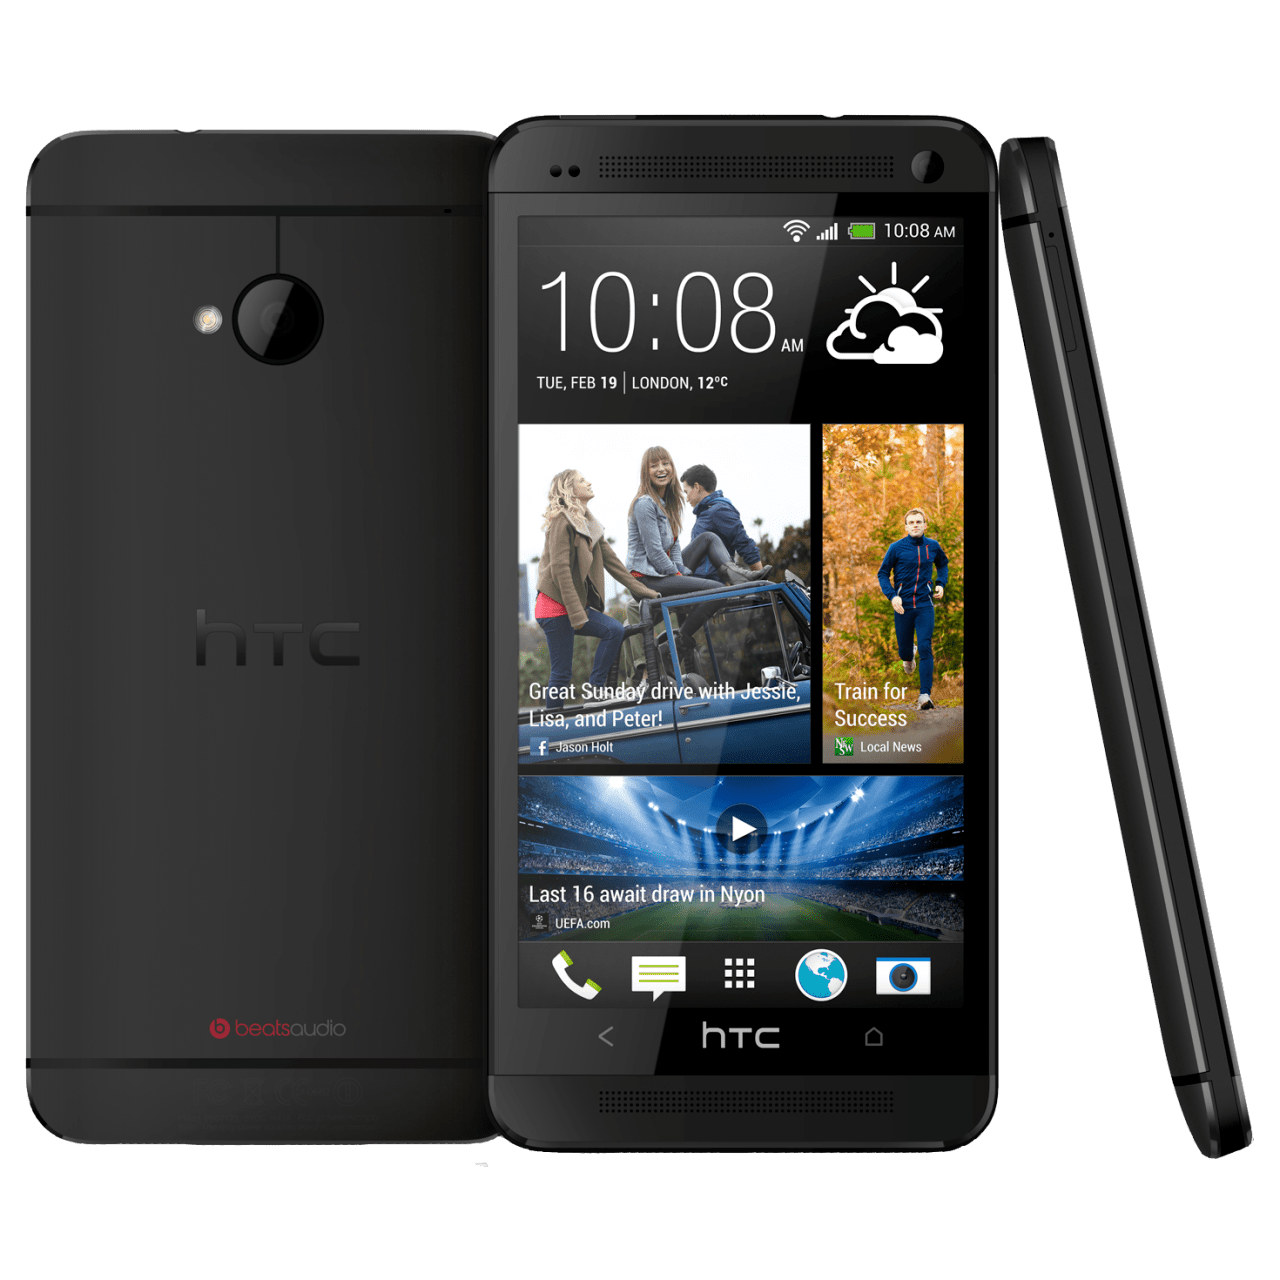 htc-one-x-4-7-quad-core-android-4-0-monster-eurodroid